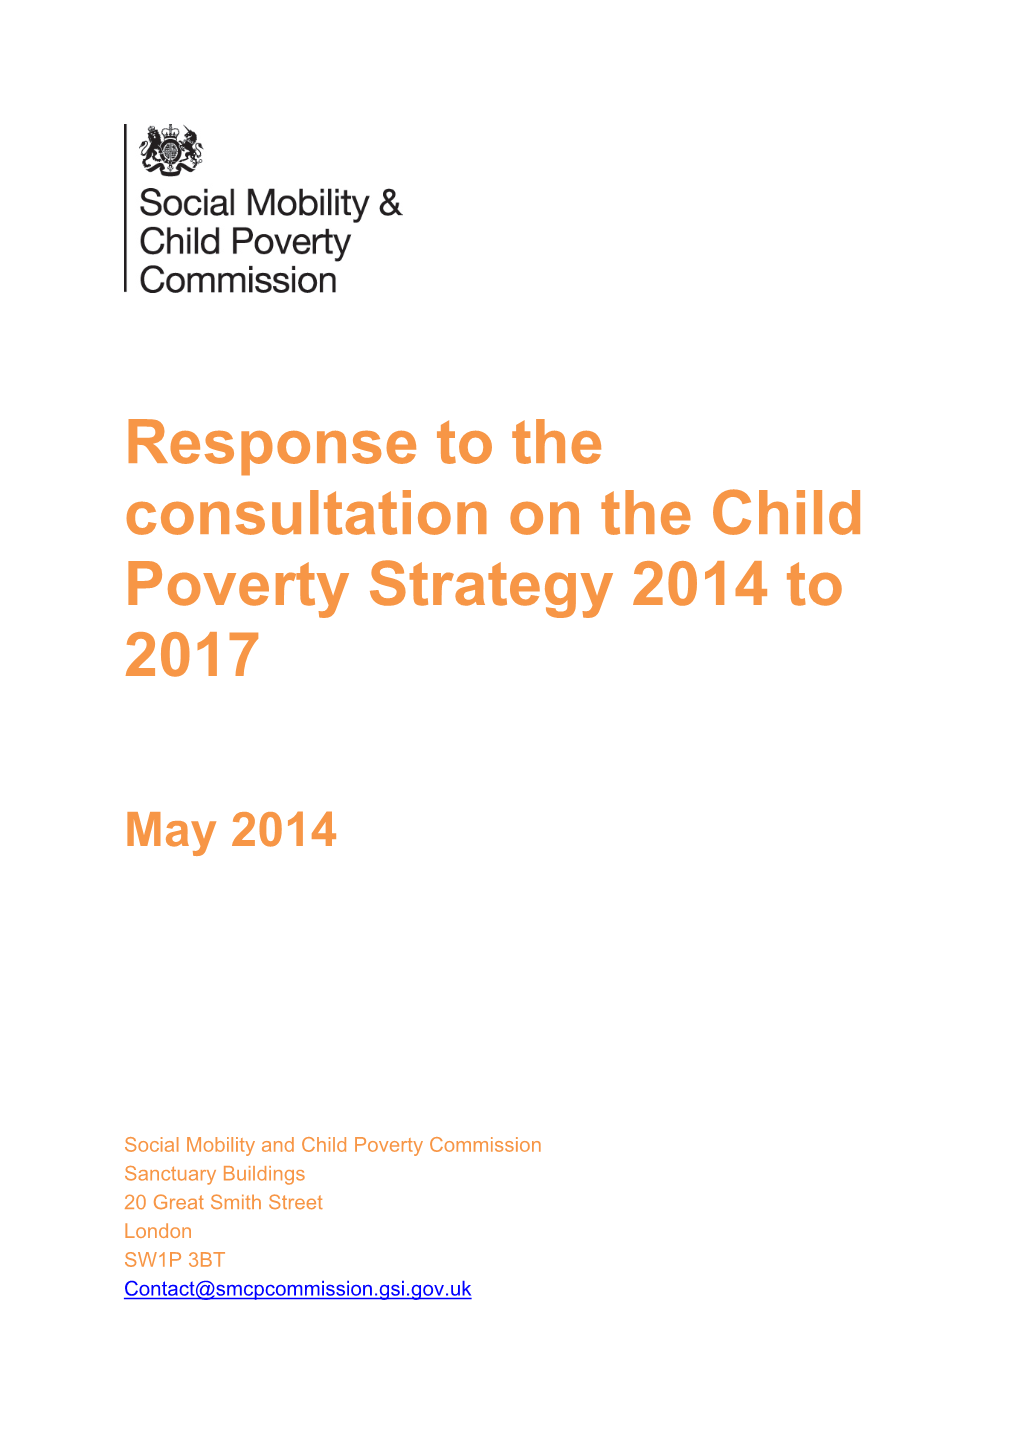 Response to the Consultation on the Child Poverty Strategy 2014 to 2017